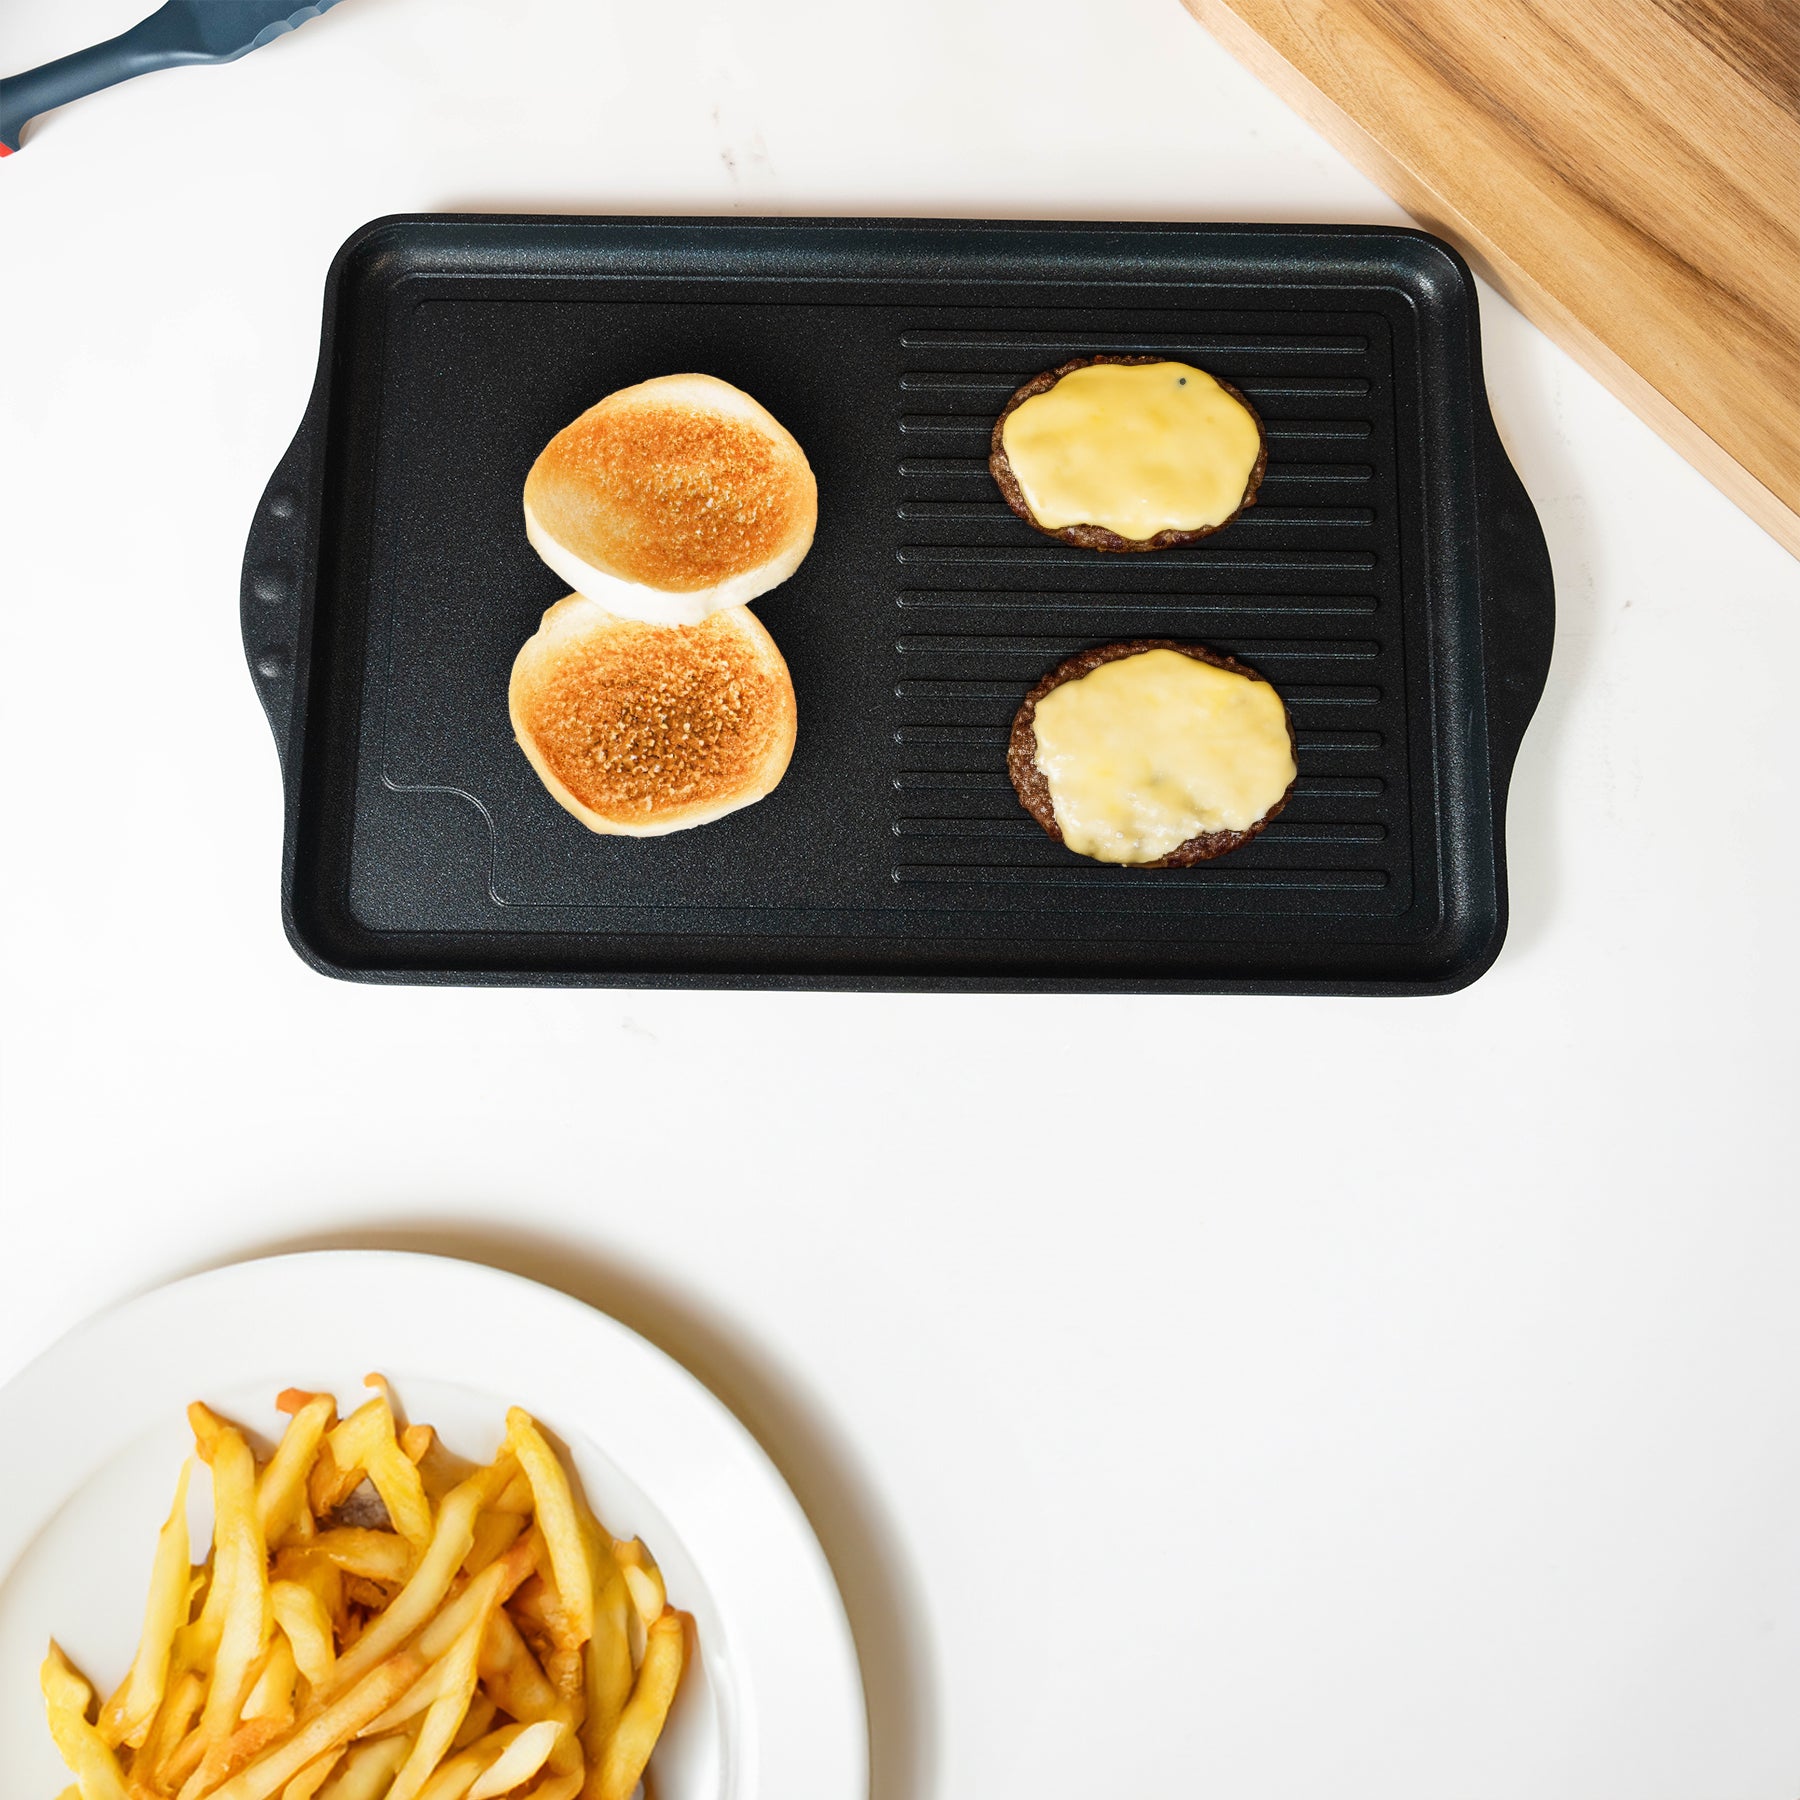 XD Nonstick 17" x 11" Double-Burner Grill/Griddle Combo in use with food on pan